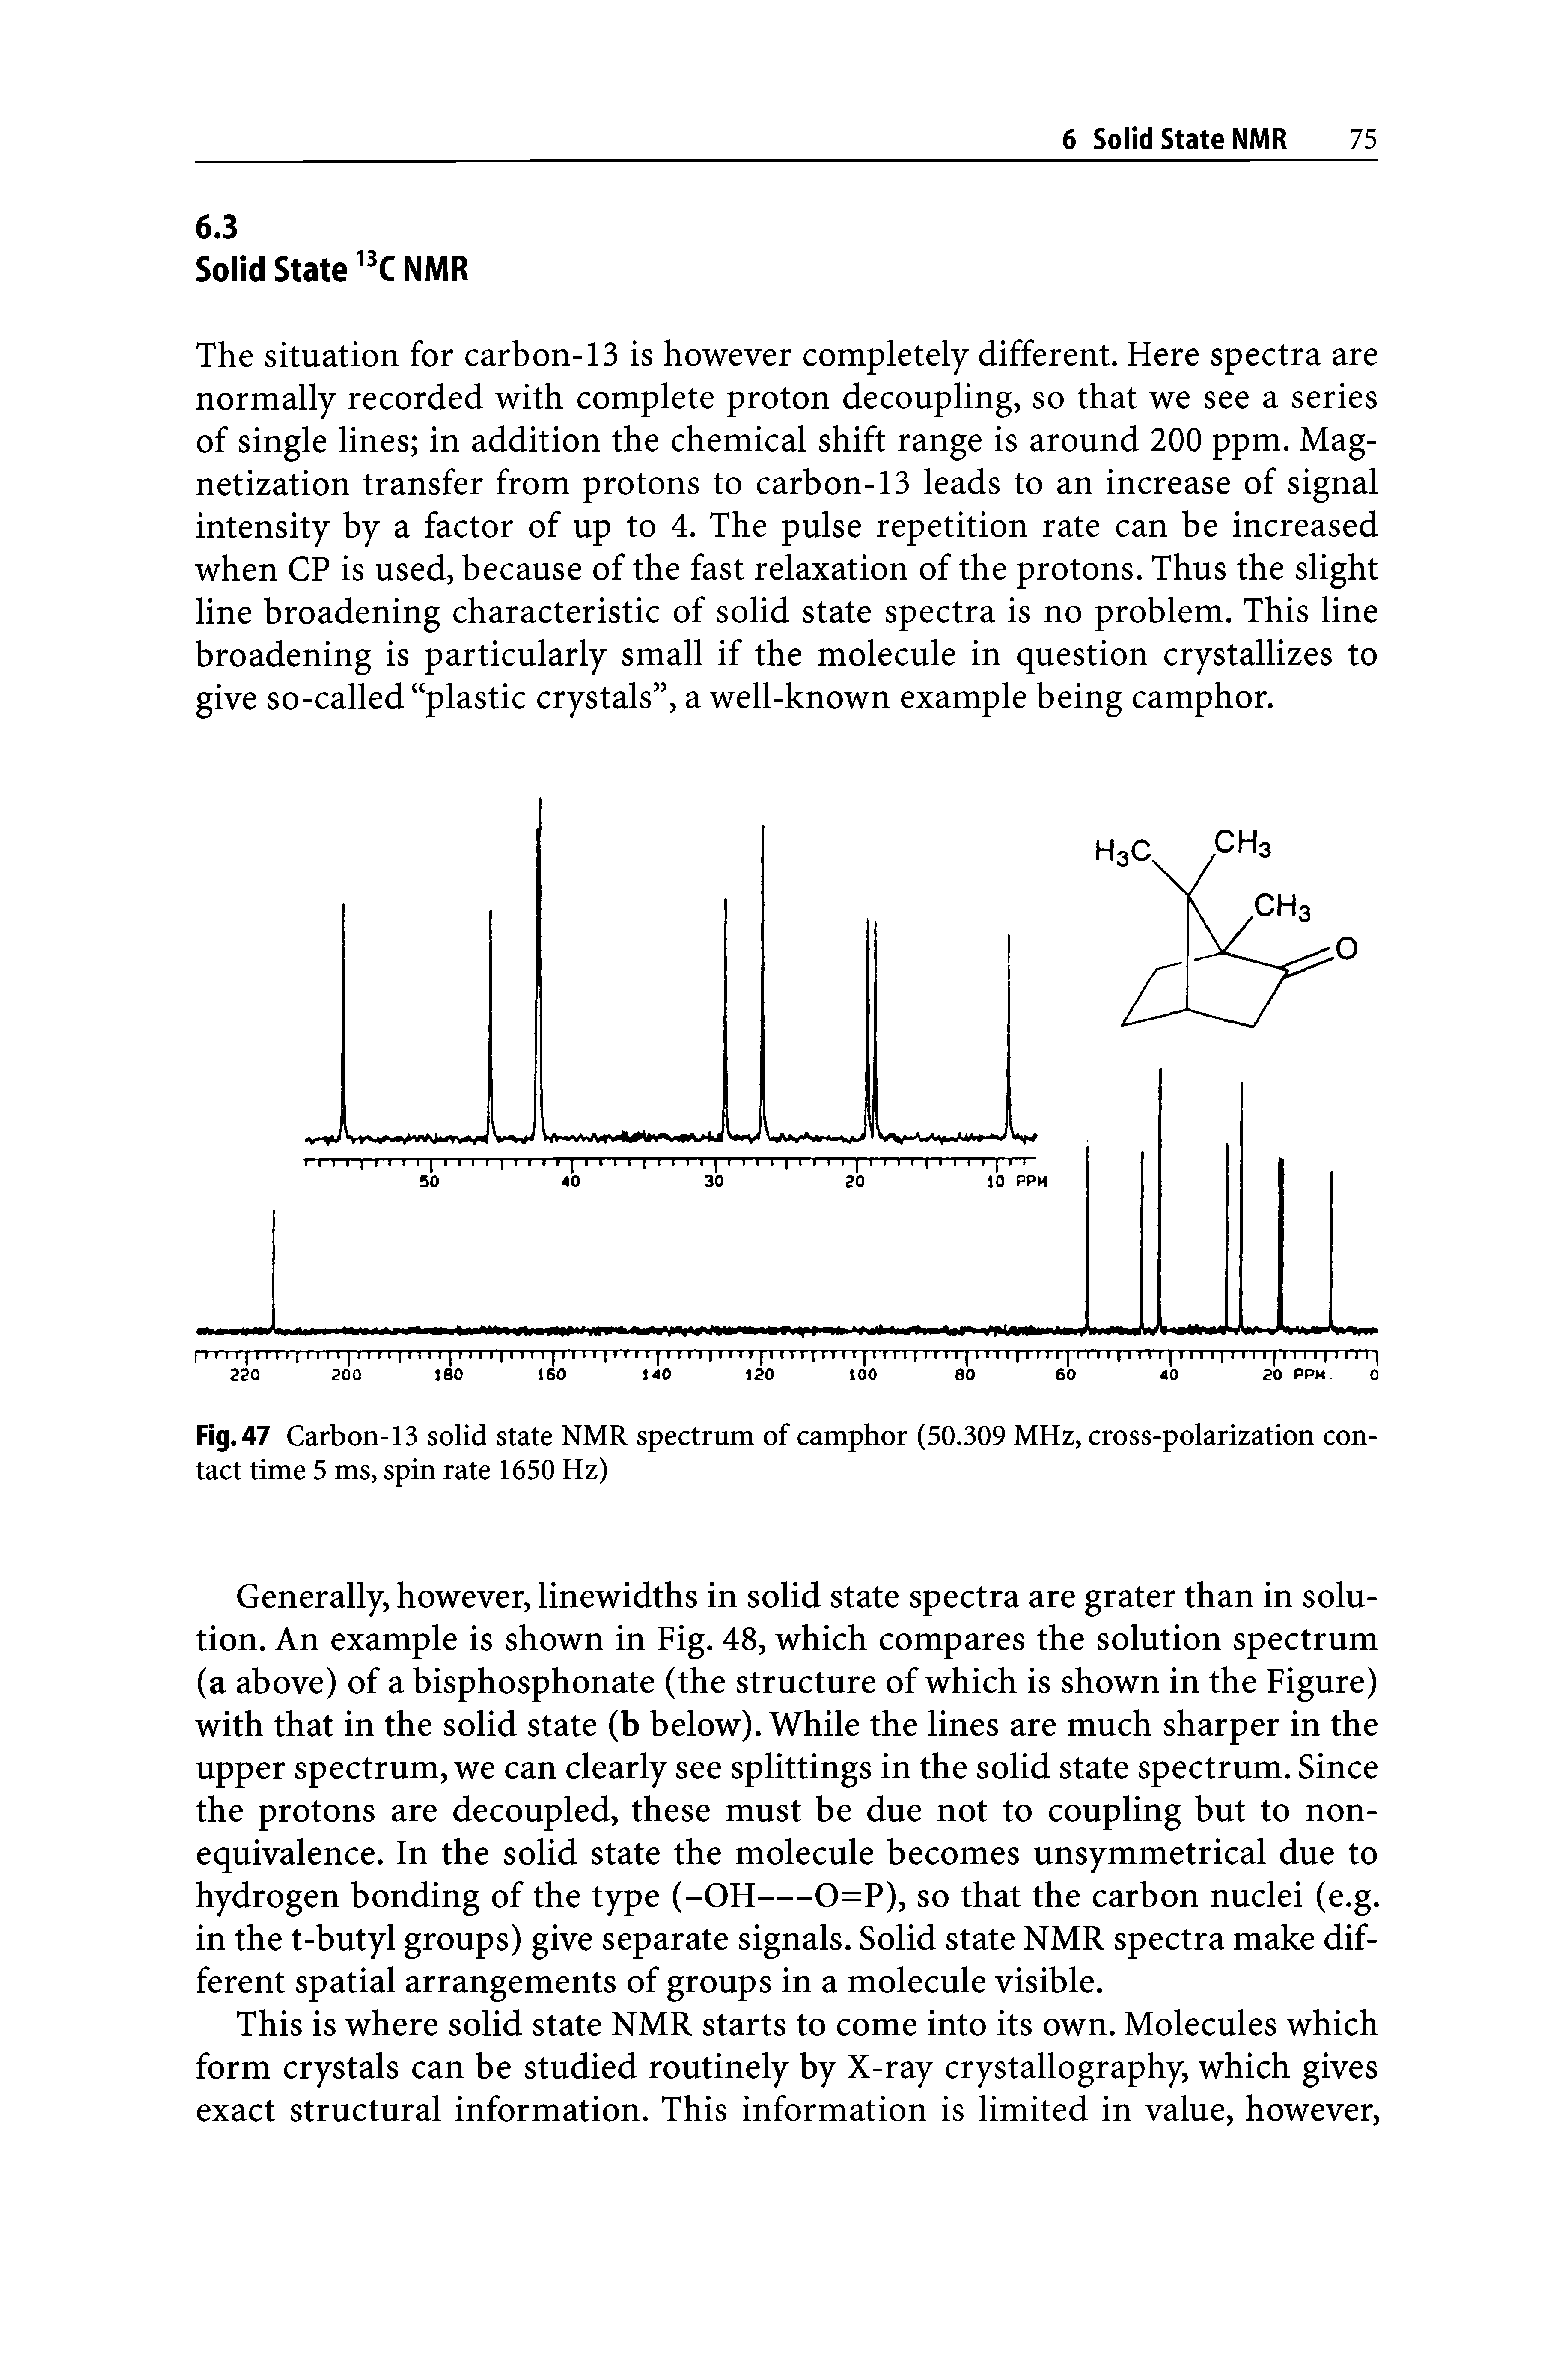 Fig. 47 Carbon-13 solid state NMR spectrum of camphor (50.309 MHz, cross-polarization contact time 5 ms, spin rate 1650 Hz)...